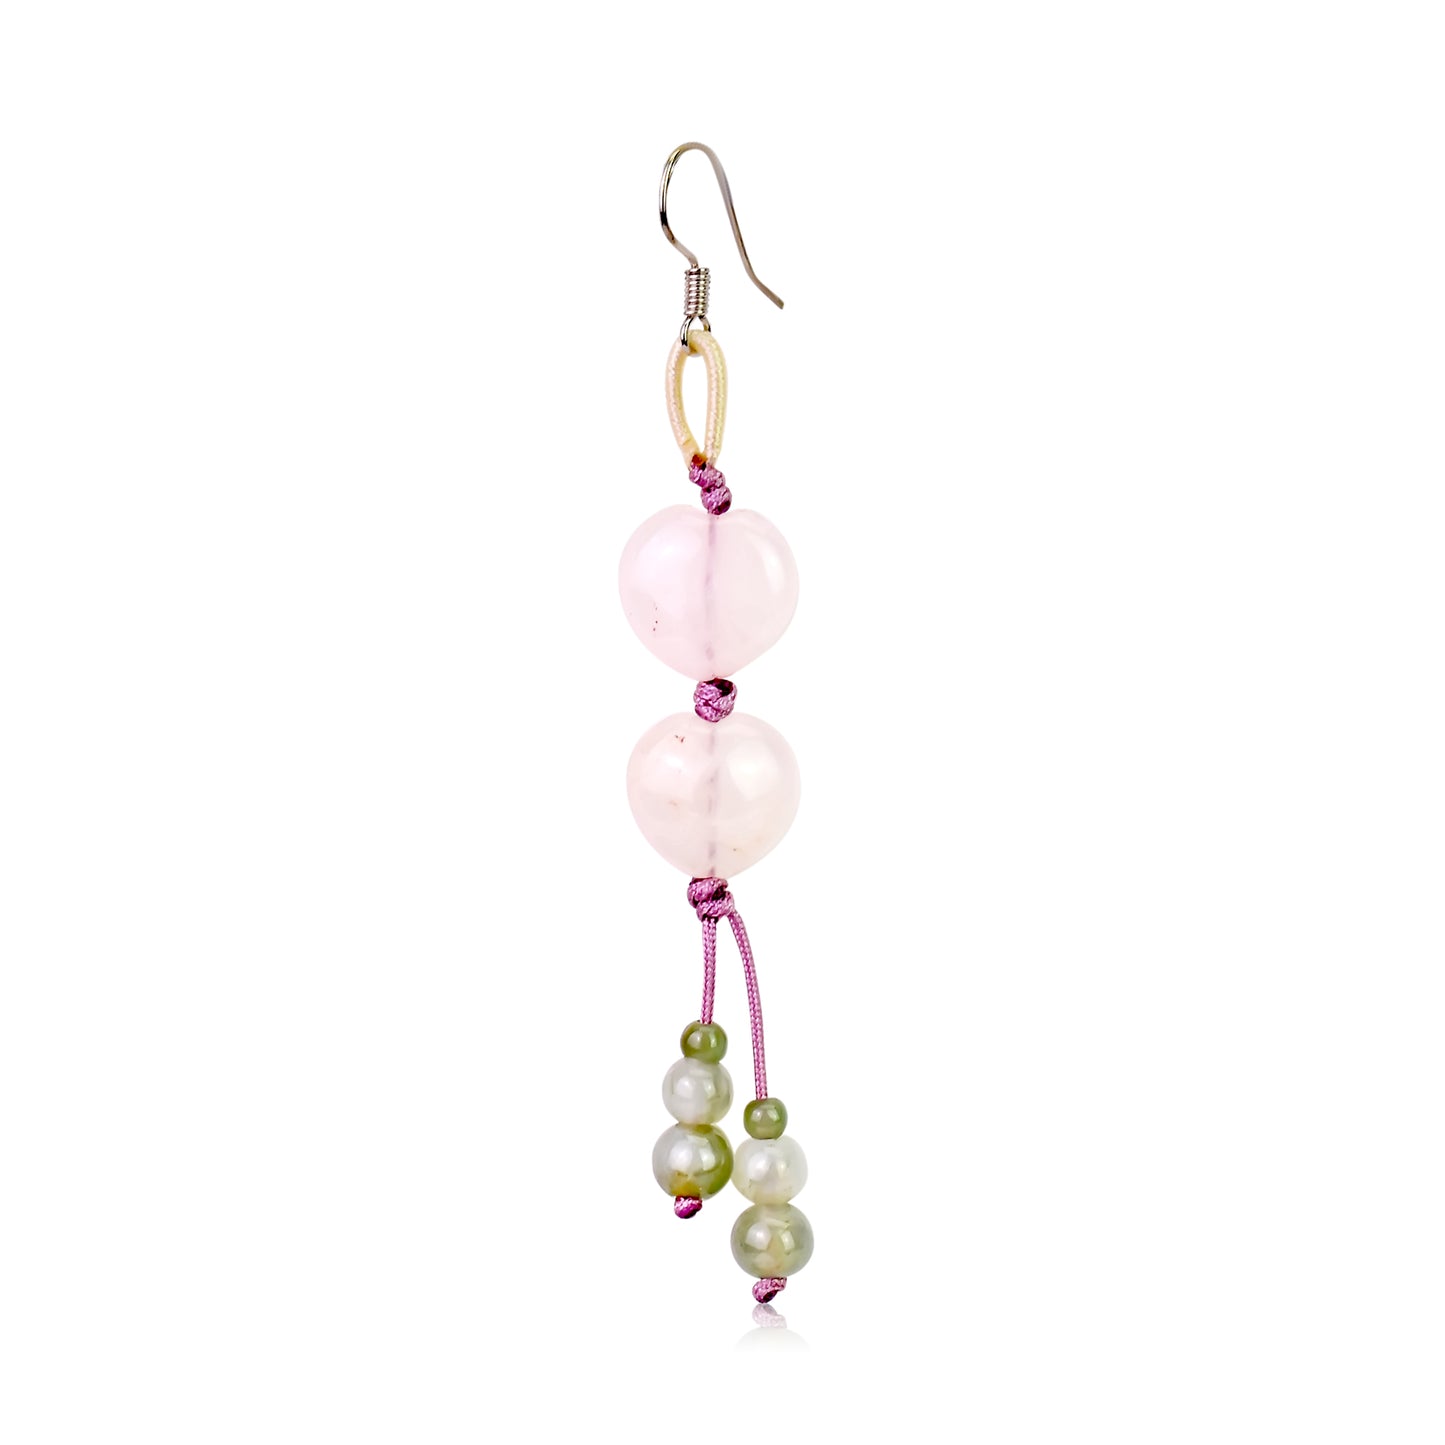 Show Your Love with Rose Quartz Double Heart Earrings made with Lavender Cord